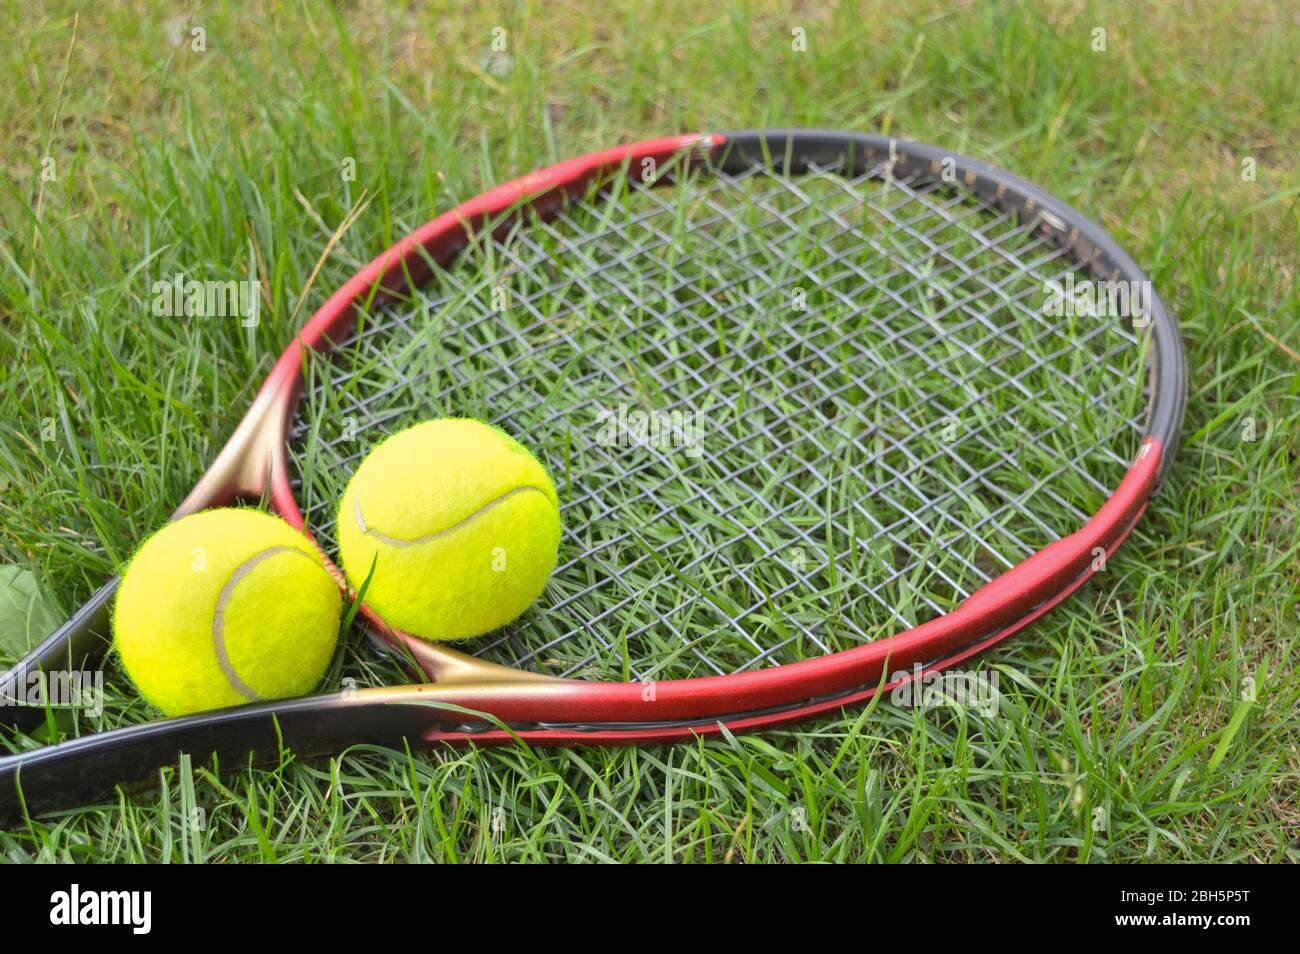 tennis racket and yellow balls lying on the grass, ready for training and games Stock Photo